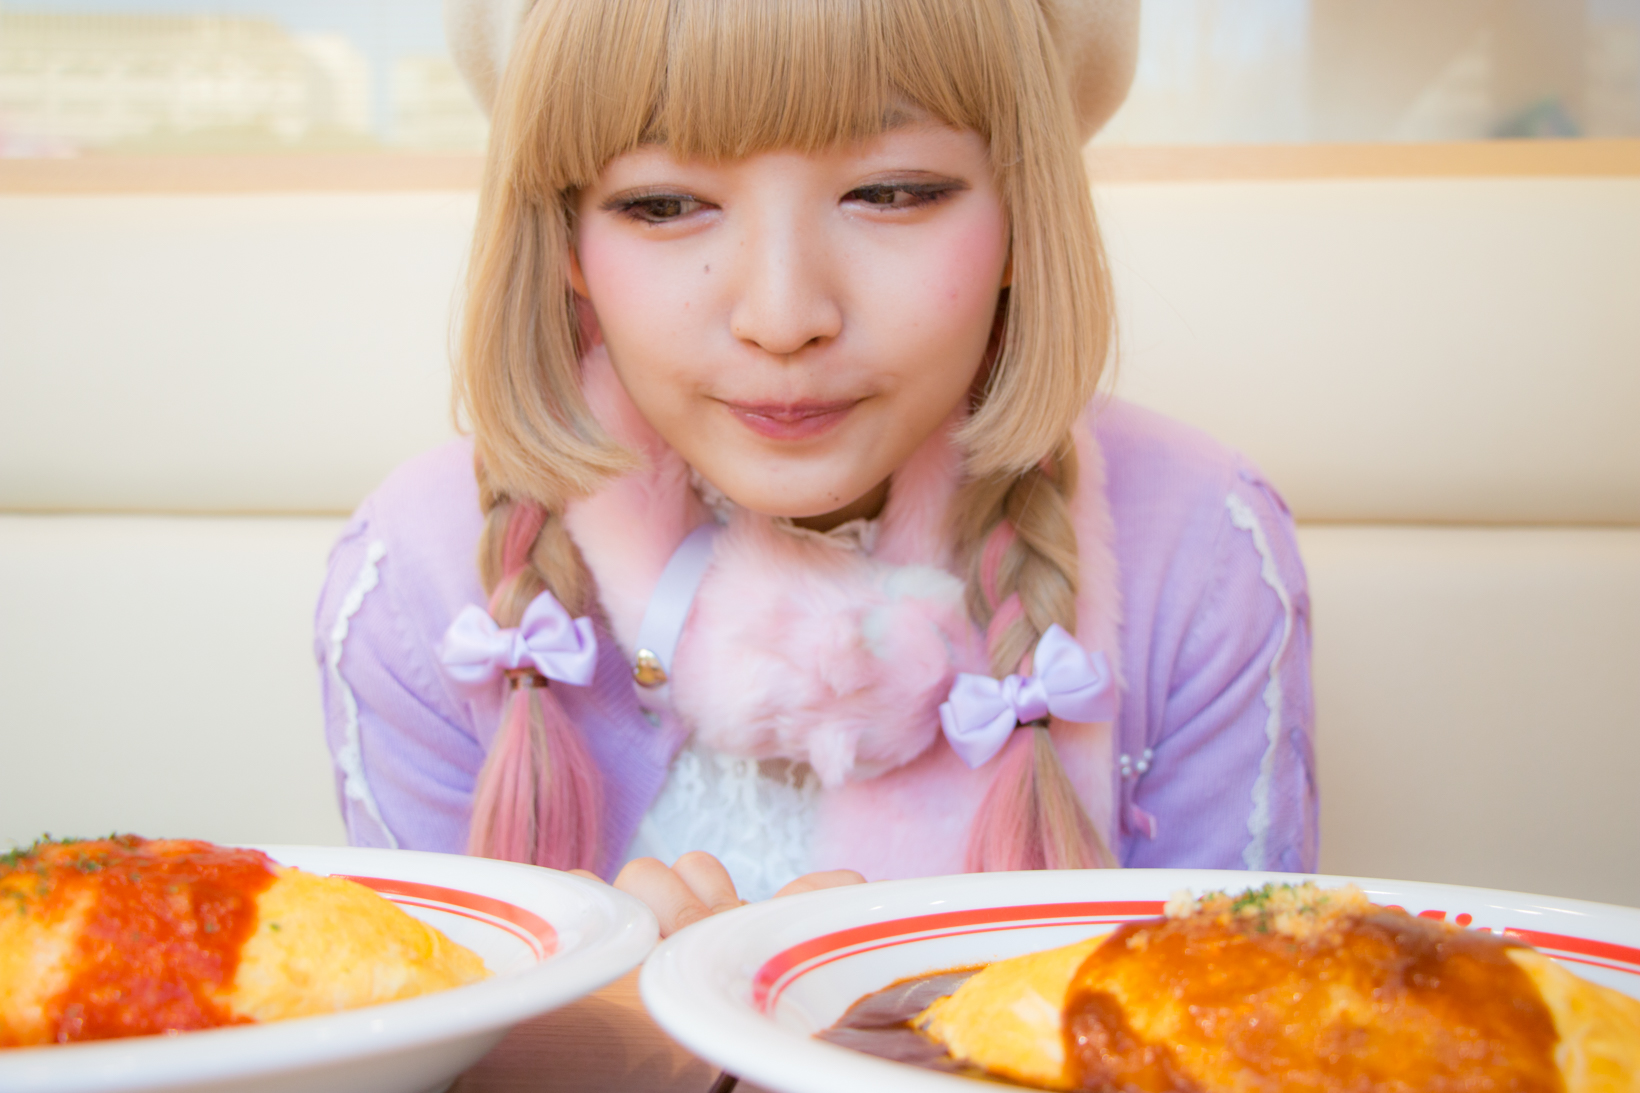 We Get our Fill of “Omurice” (Western Food Invented in Japan) at Pomme no Ki Harajuku